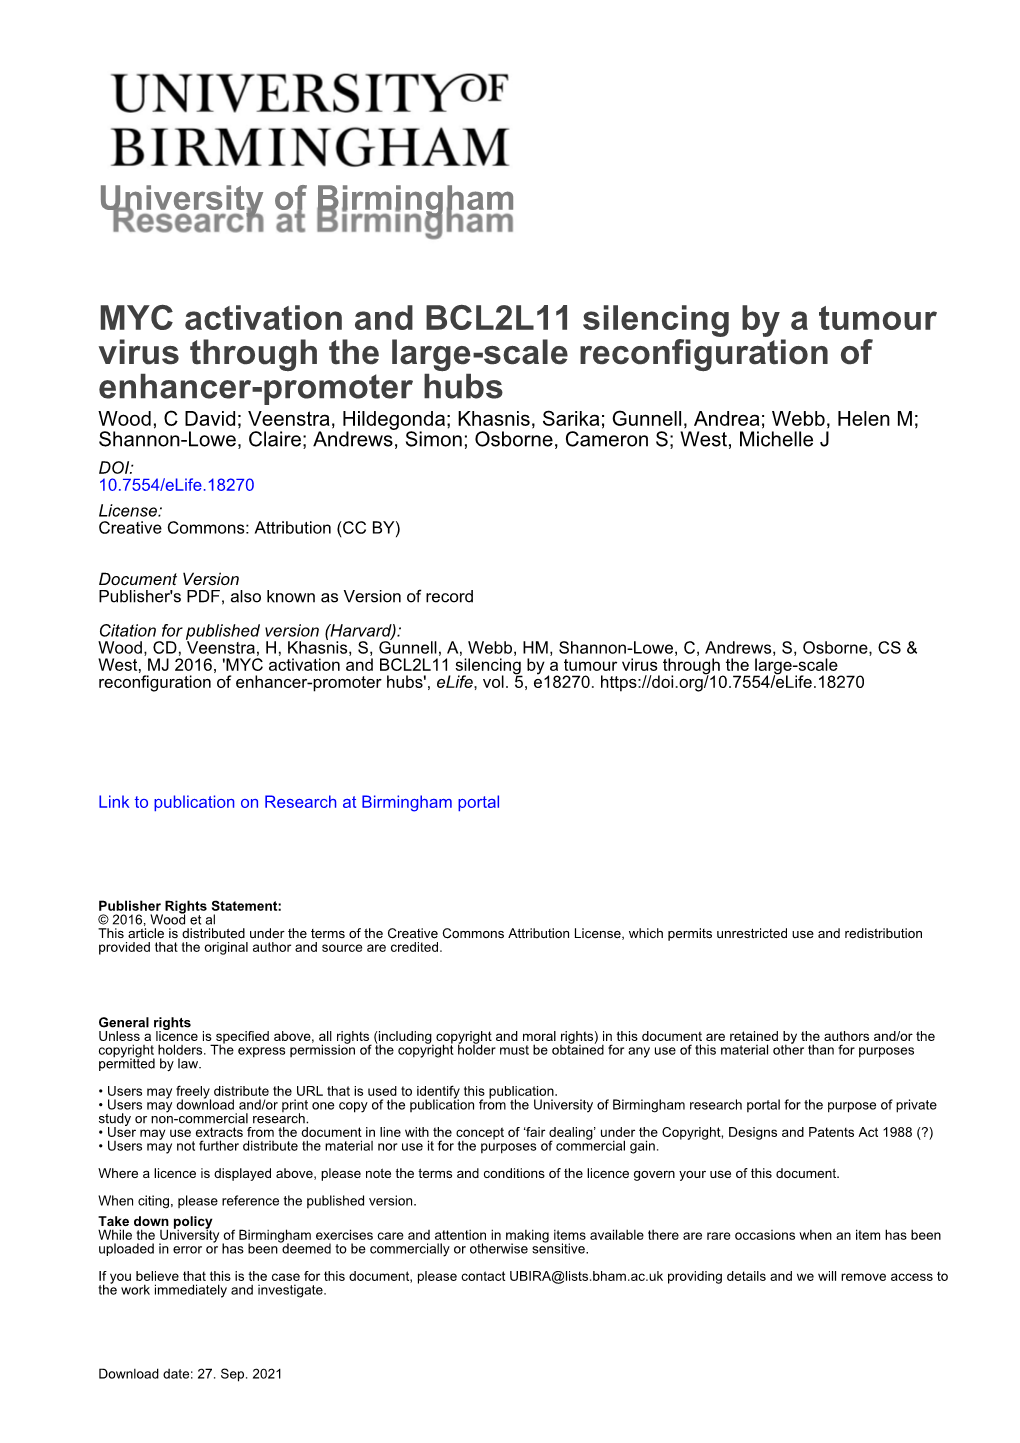 University of Birmingham MYC Activation and BCL2L11 Silencing